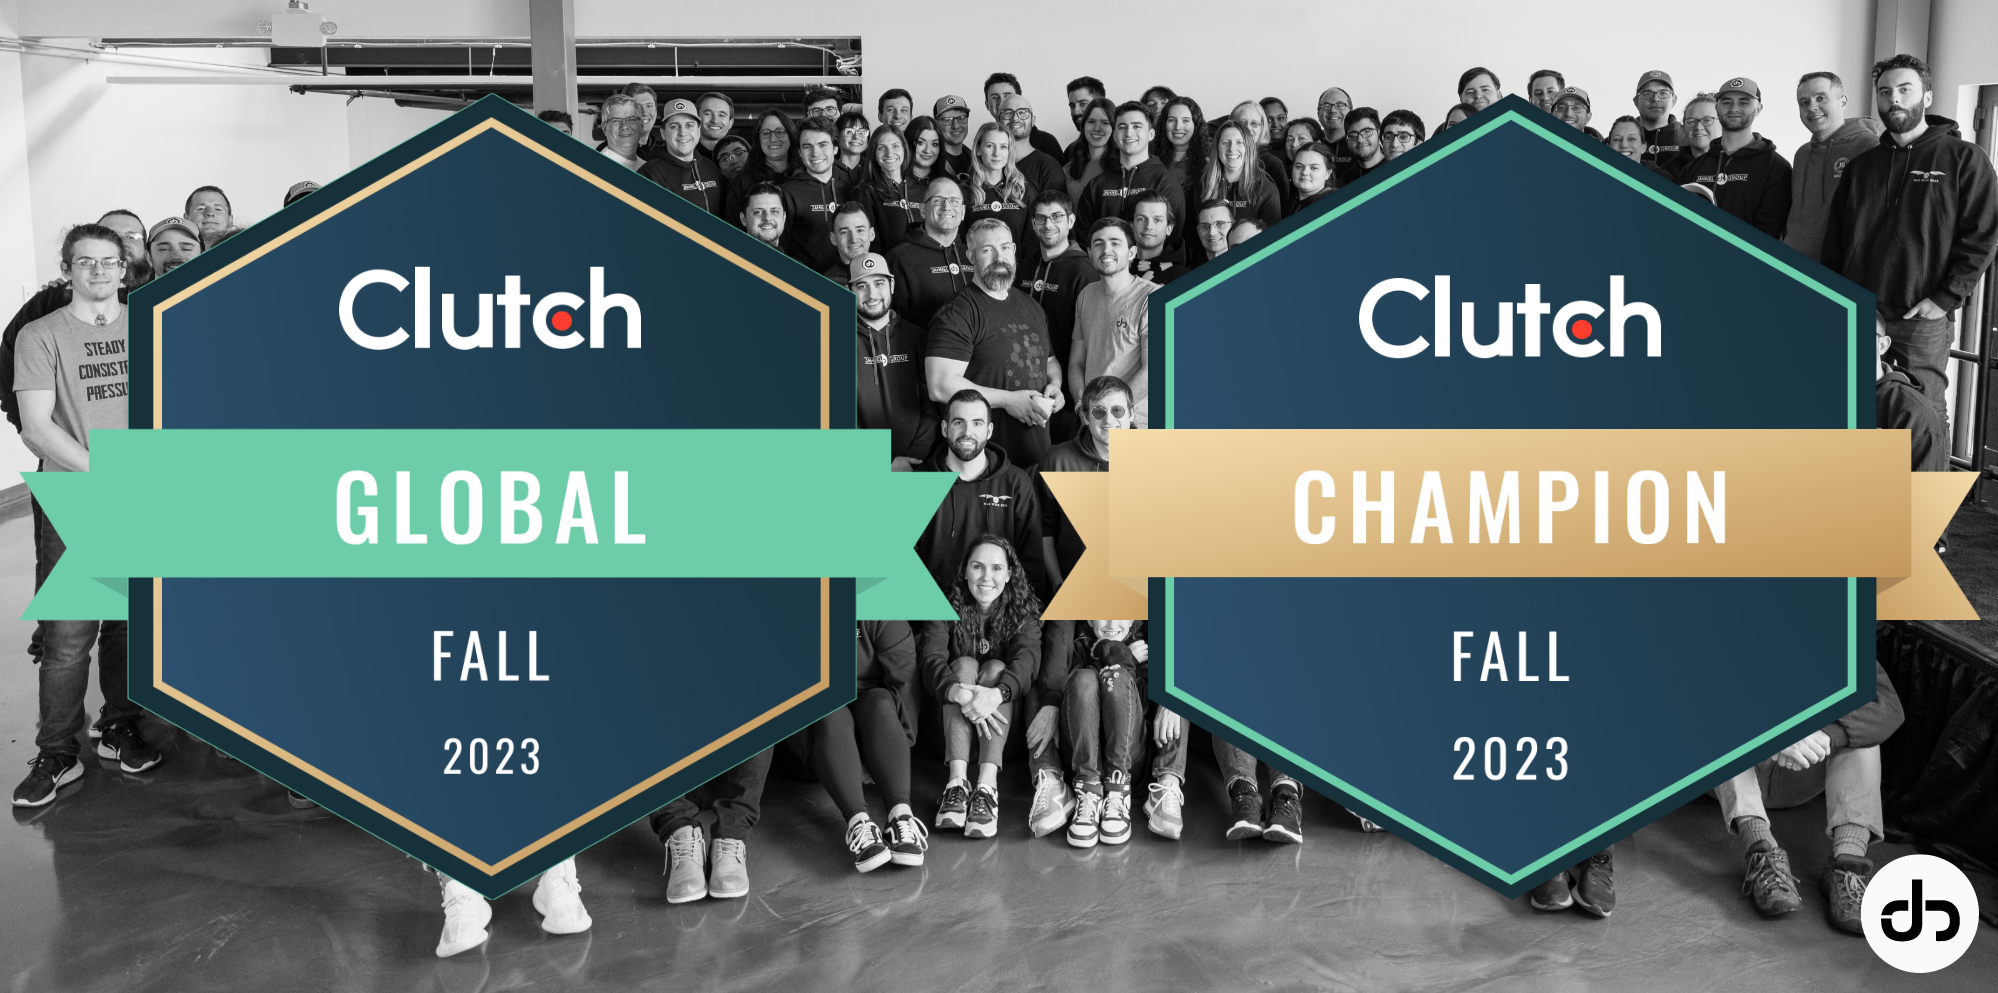 Two clutch awards for Global and Champion